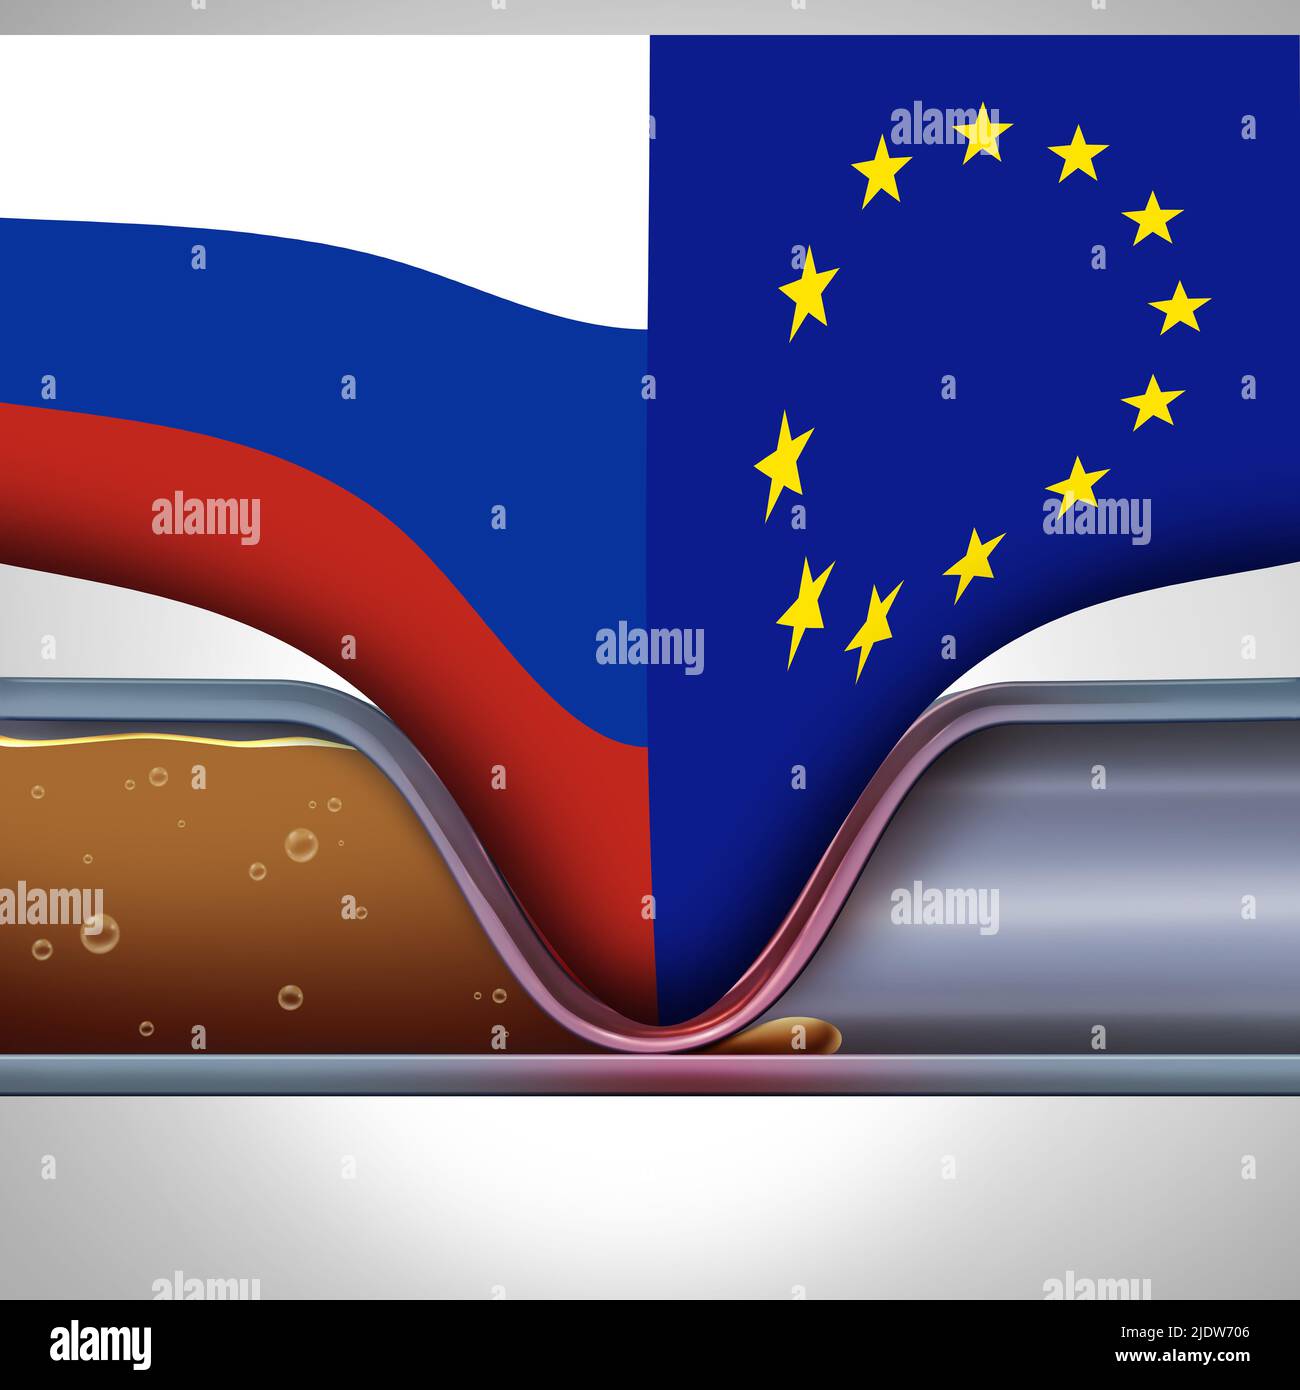 Russia Europe Gas Crisis and European oil Supply Crisis or EU shortages in energy supplies as a pipeline fuel flow being cut by geopolitical. Stock Photo